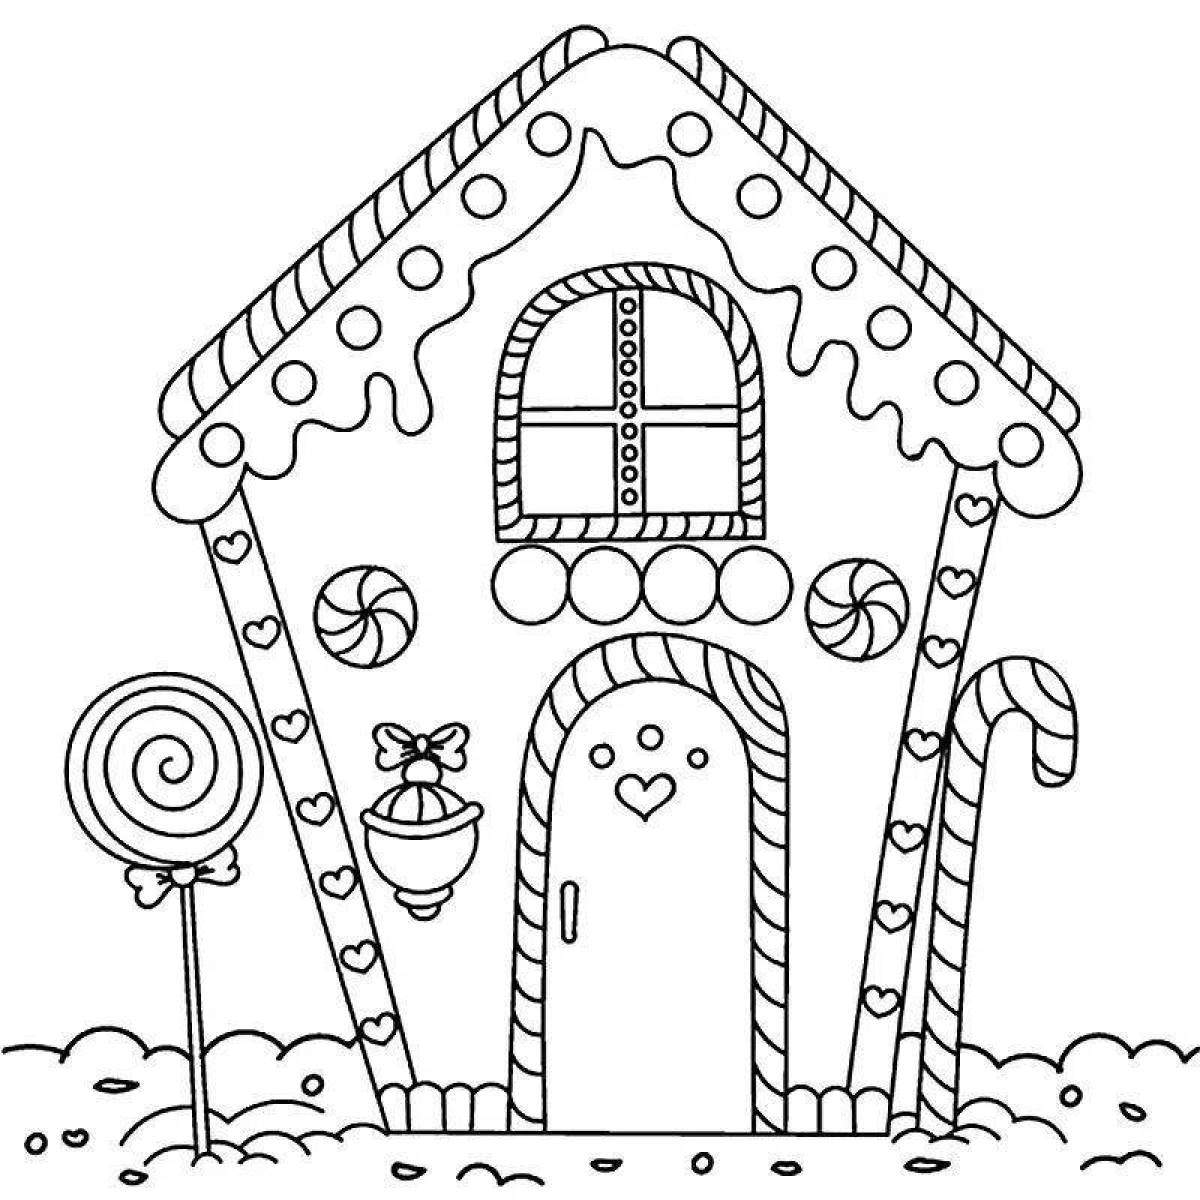 Coloring book magic house for kids